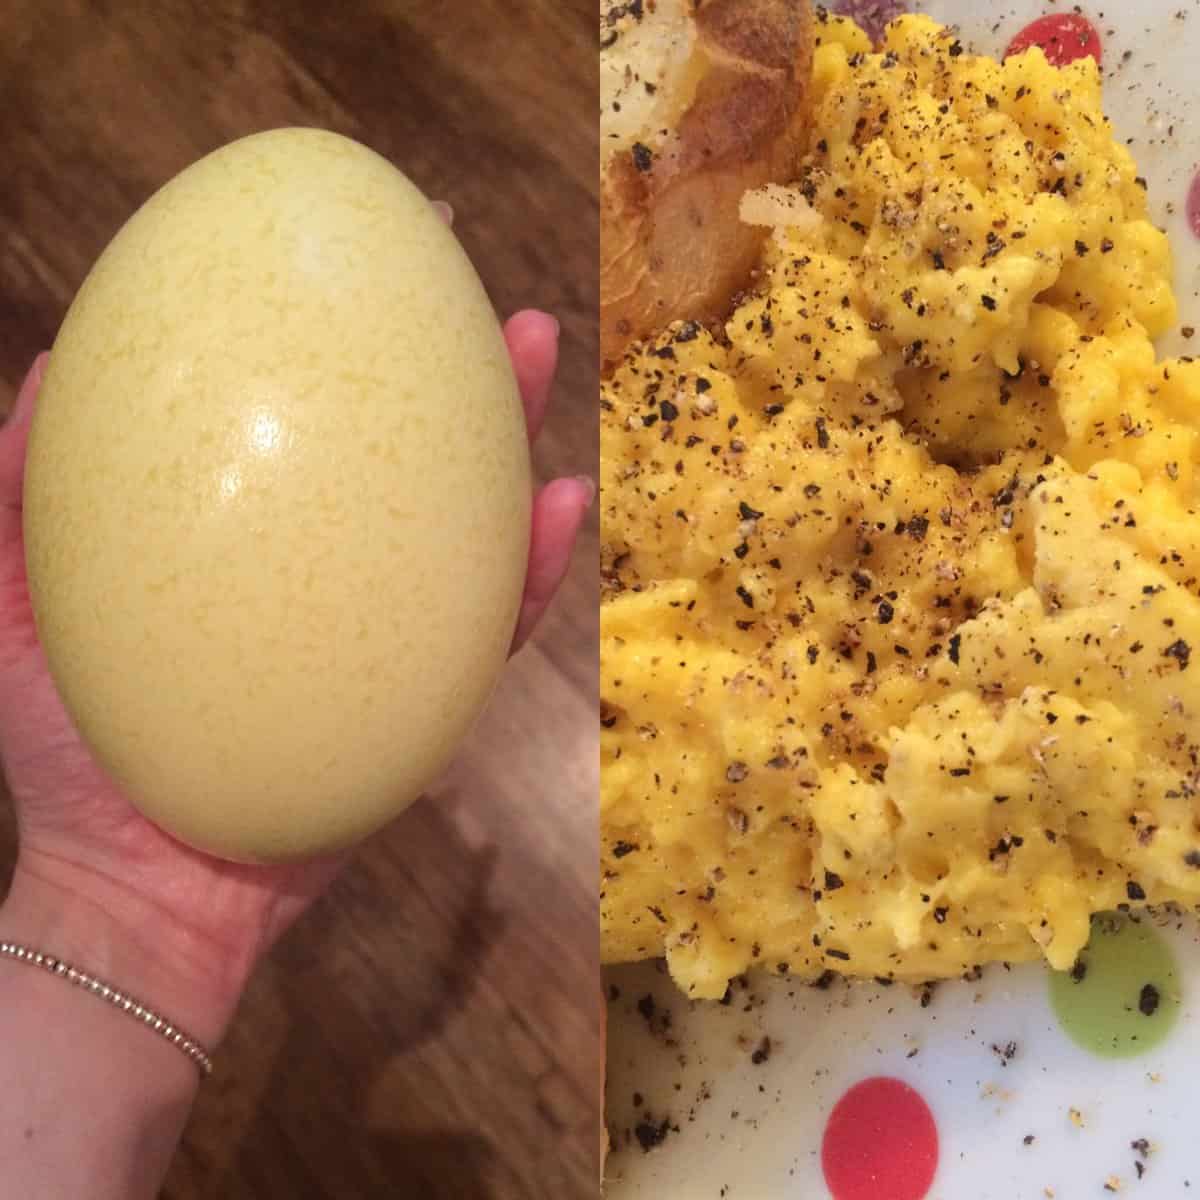 Look at this dinosaur's - I mean - rhea's egg! A rhea is a large bird, that looks like a small ostrich, with big eyes and long legs. A neighboring farm gave us this egg & I made an omelette. Inside the shell contained a litre of egg yolk!